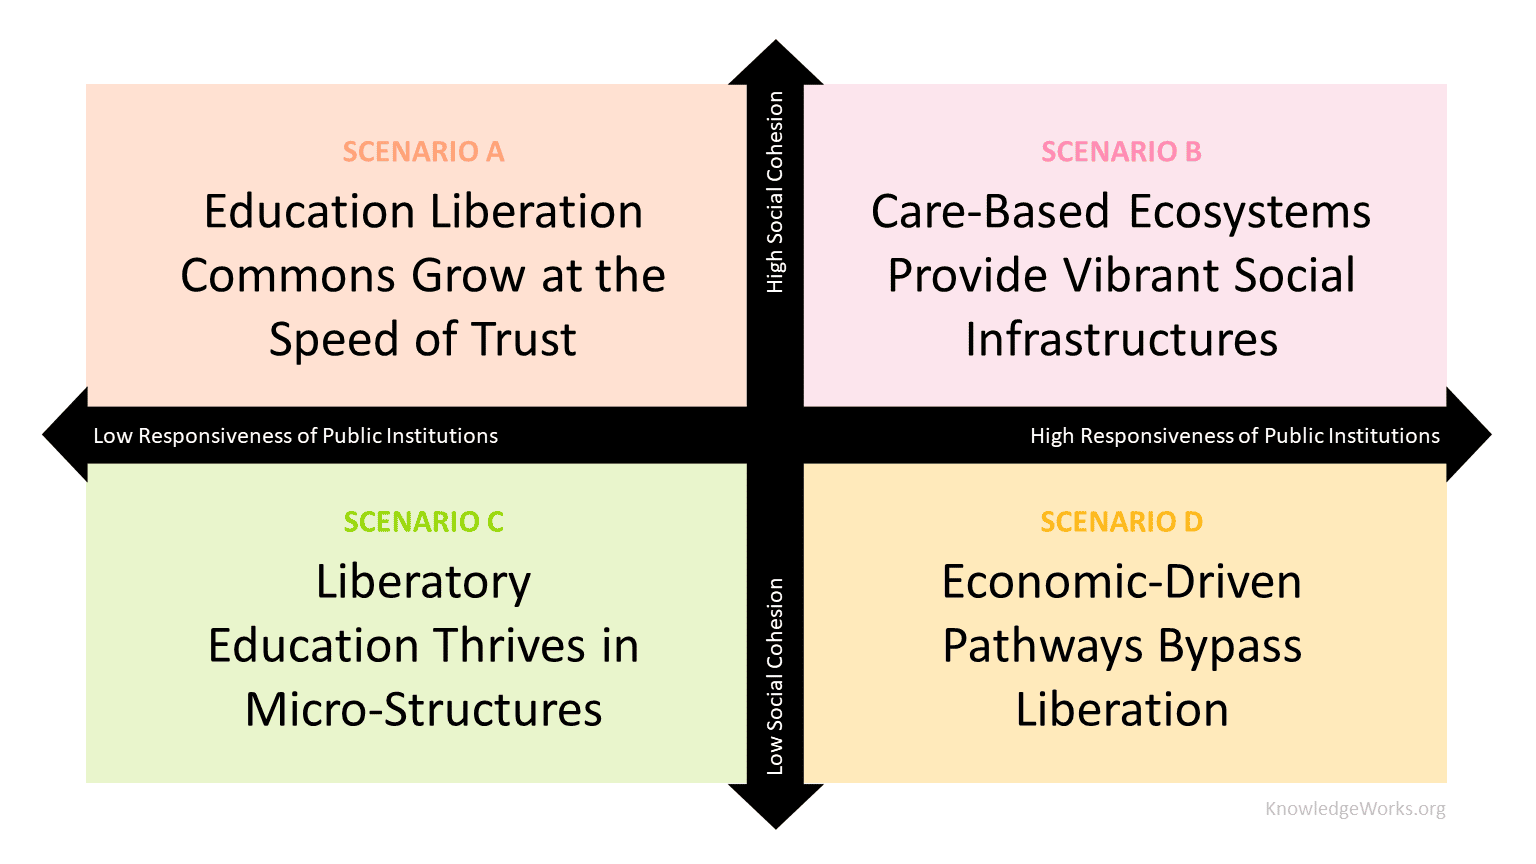 Four scenarios sit on a matrix with axes of low to high social cohesion and low to high responsiveness of public institutions. The scenarios are: A) Education Liberation Commons Grow at the Speed of Trust; B) Care-Based Ecosystems Provide Vibrant Social Infrastructure; C) Liberatory Education Thrives in Micro-Structures; and D) Economic-Driven Pathways Bypass Liberation.